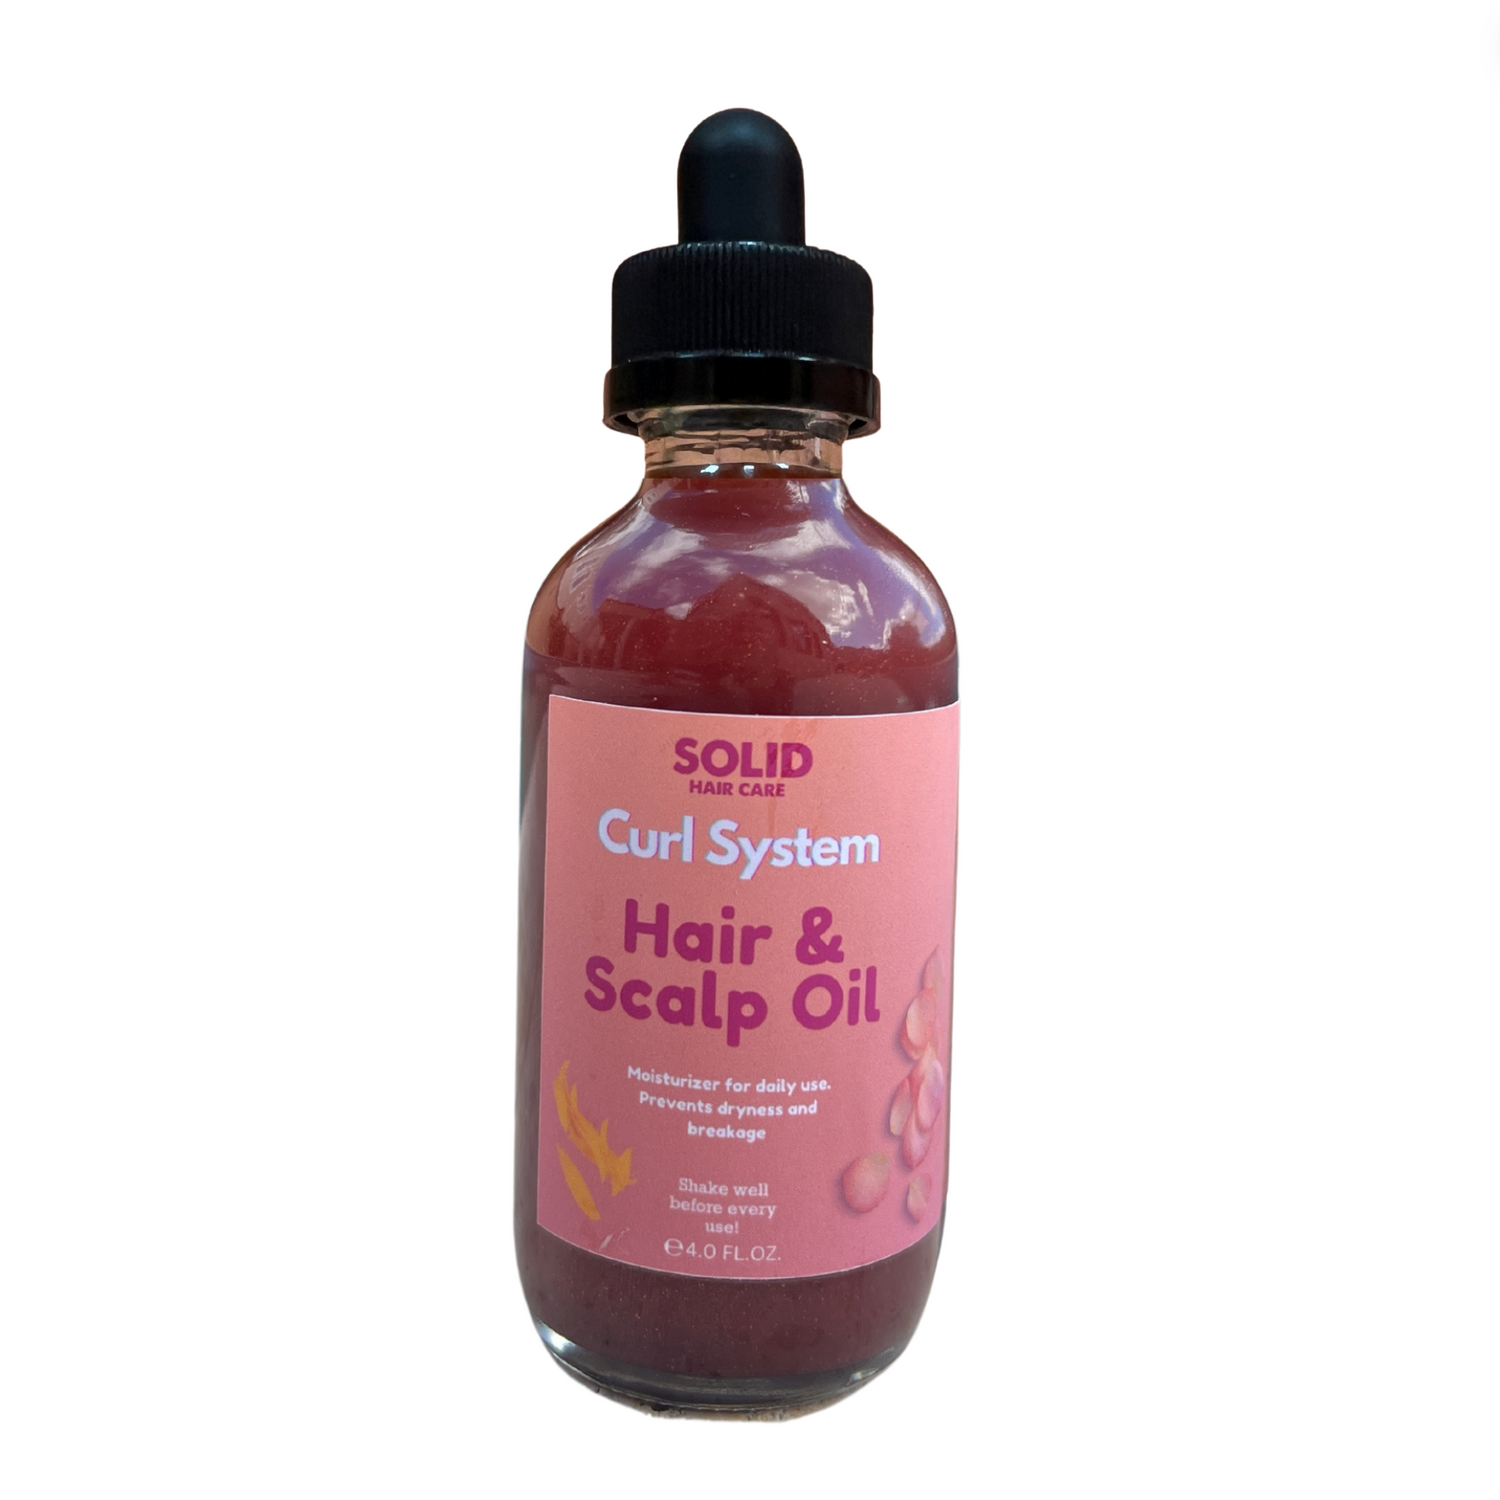 Hair and Scalp Oil - The Curl System